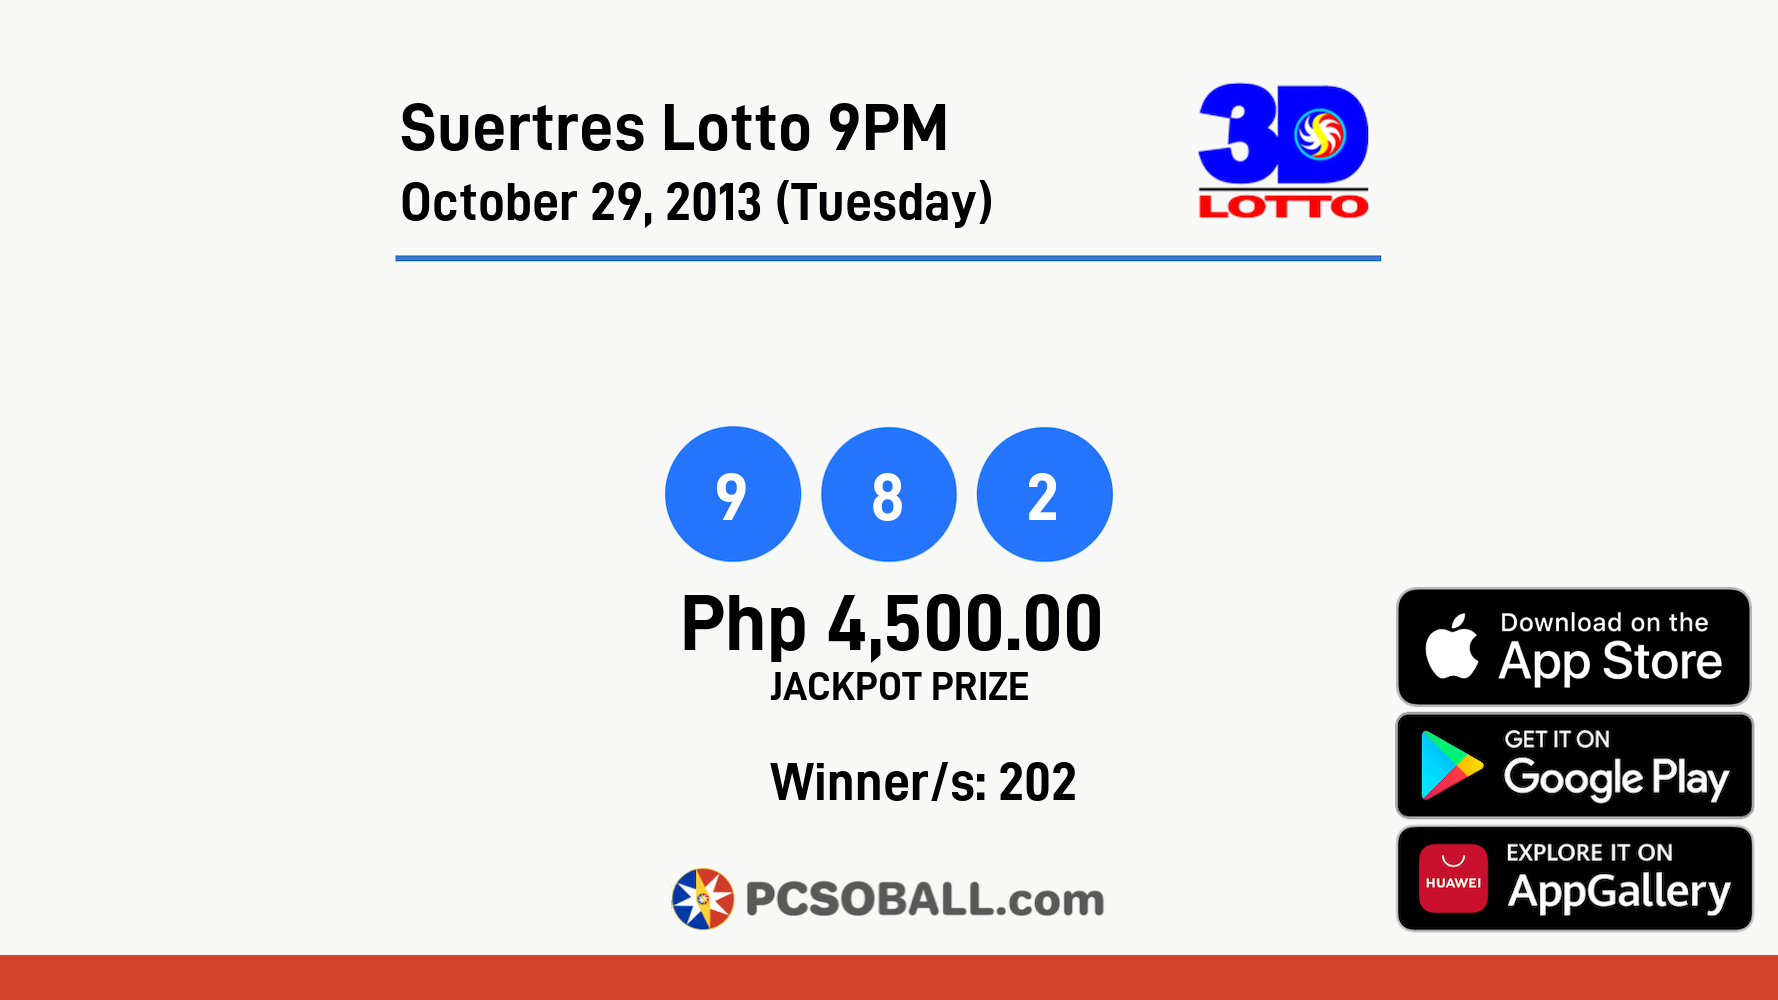 Suertres Lotto 9PM October 29, 2013 (Tuesday) Result